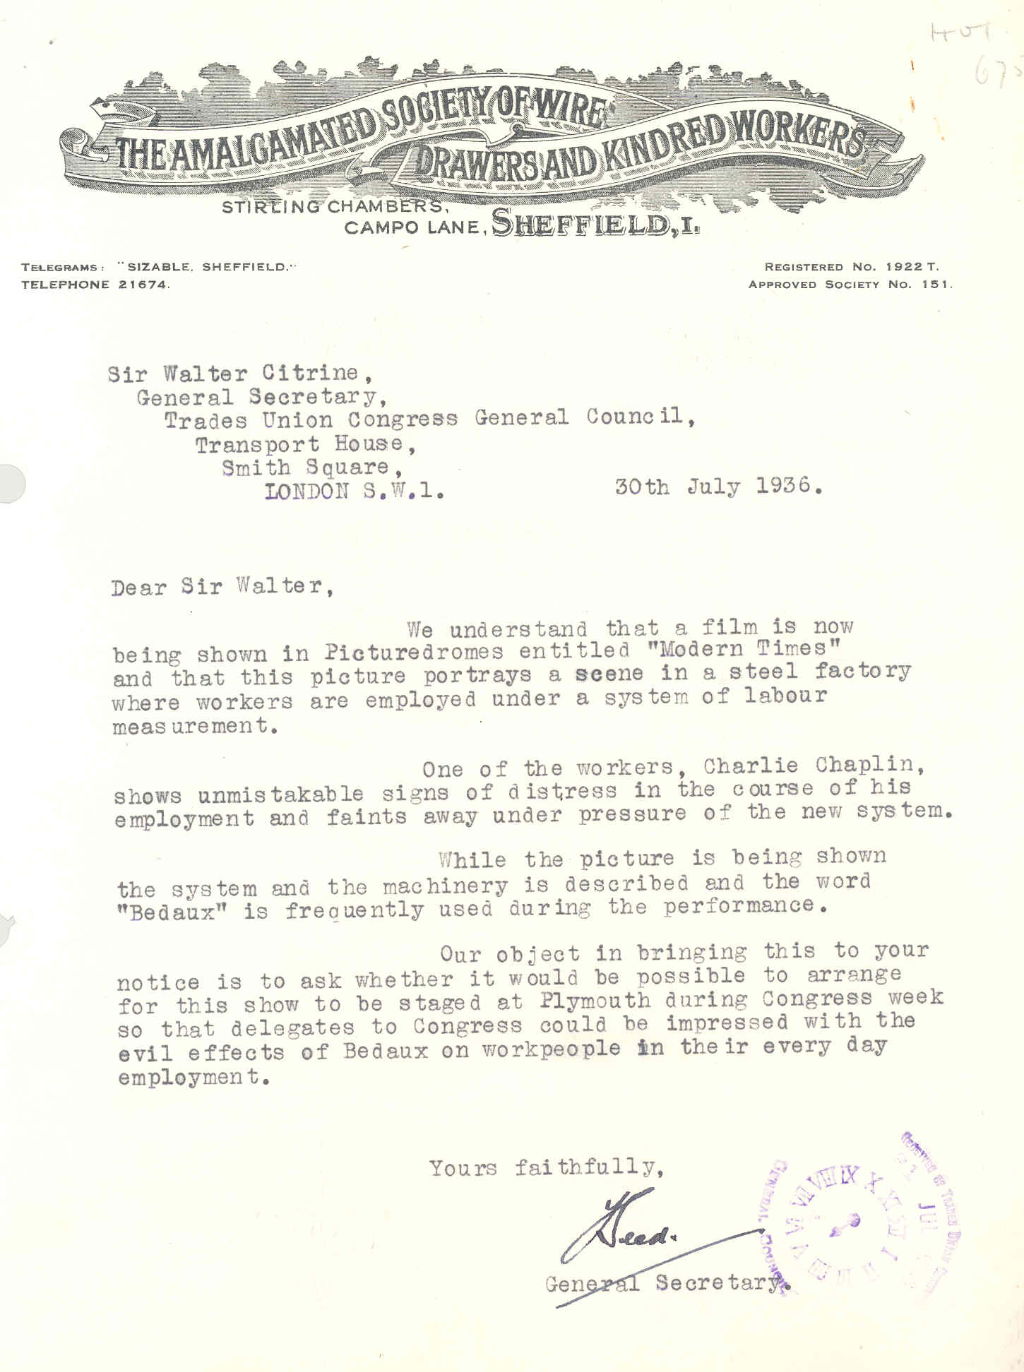   Letter enquiring about the Charlie Chaplin film Modern Times, 1936